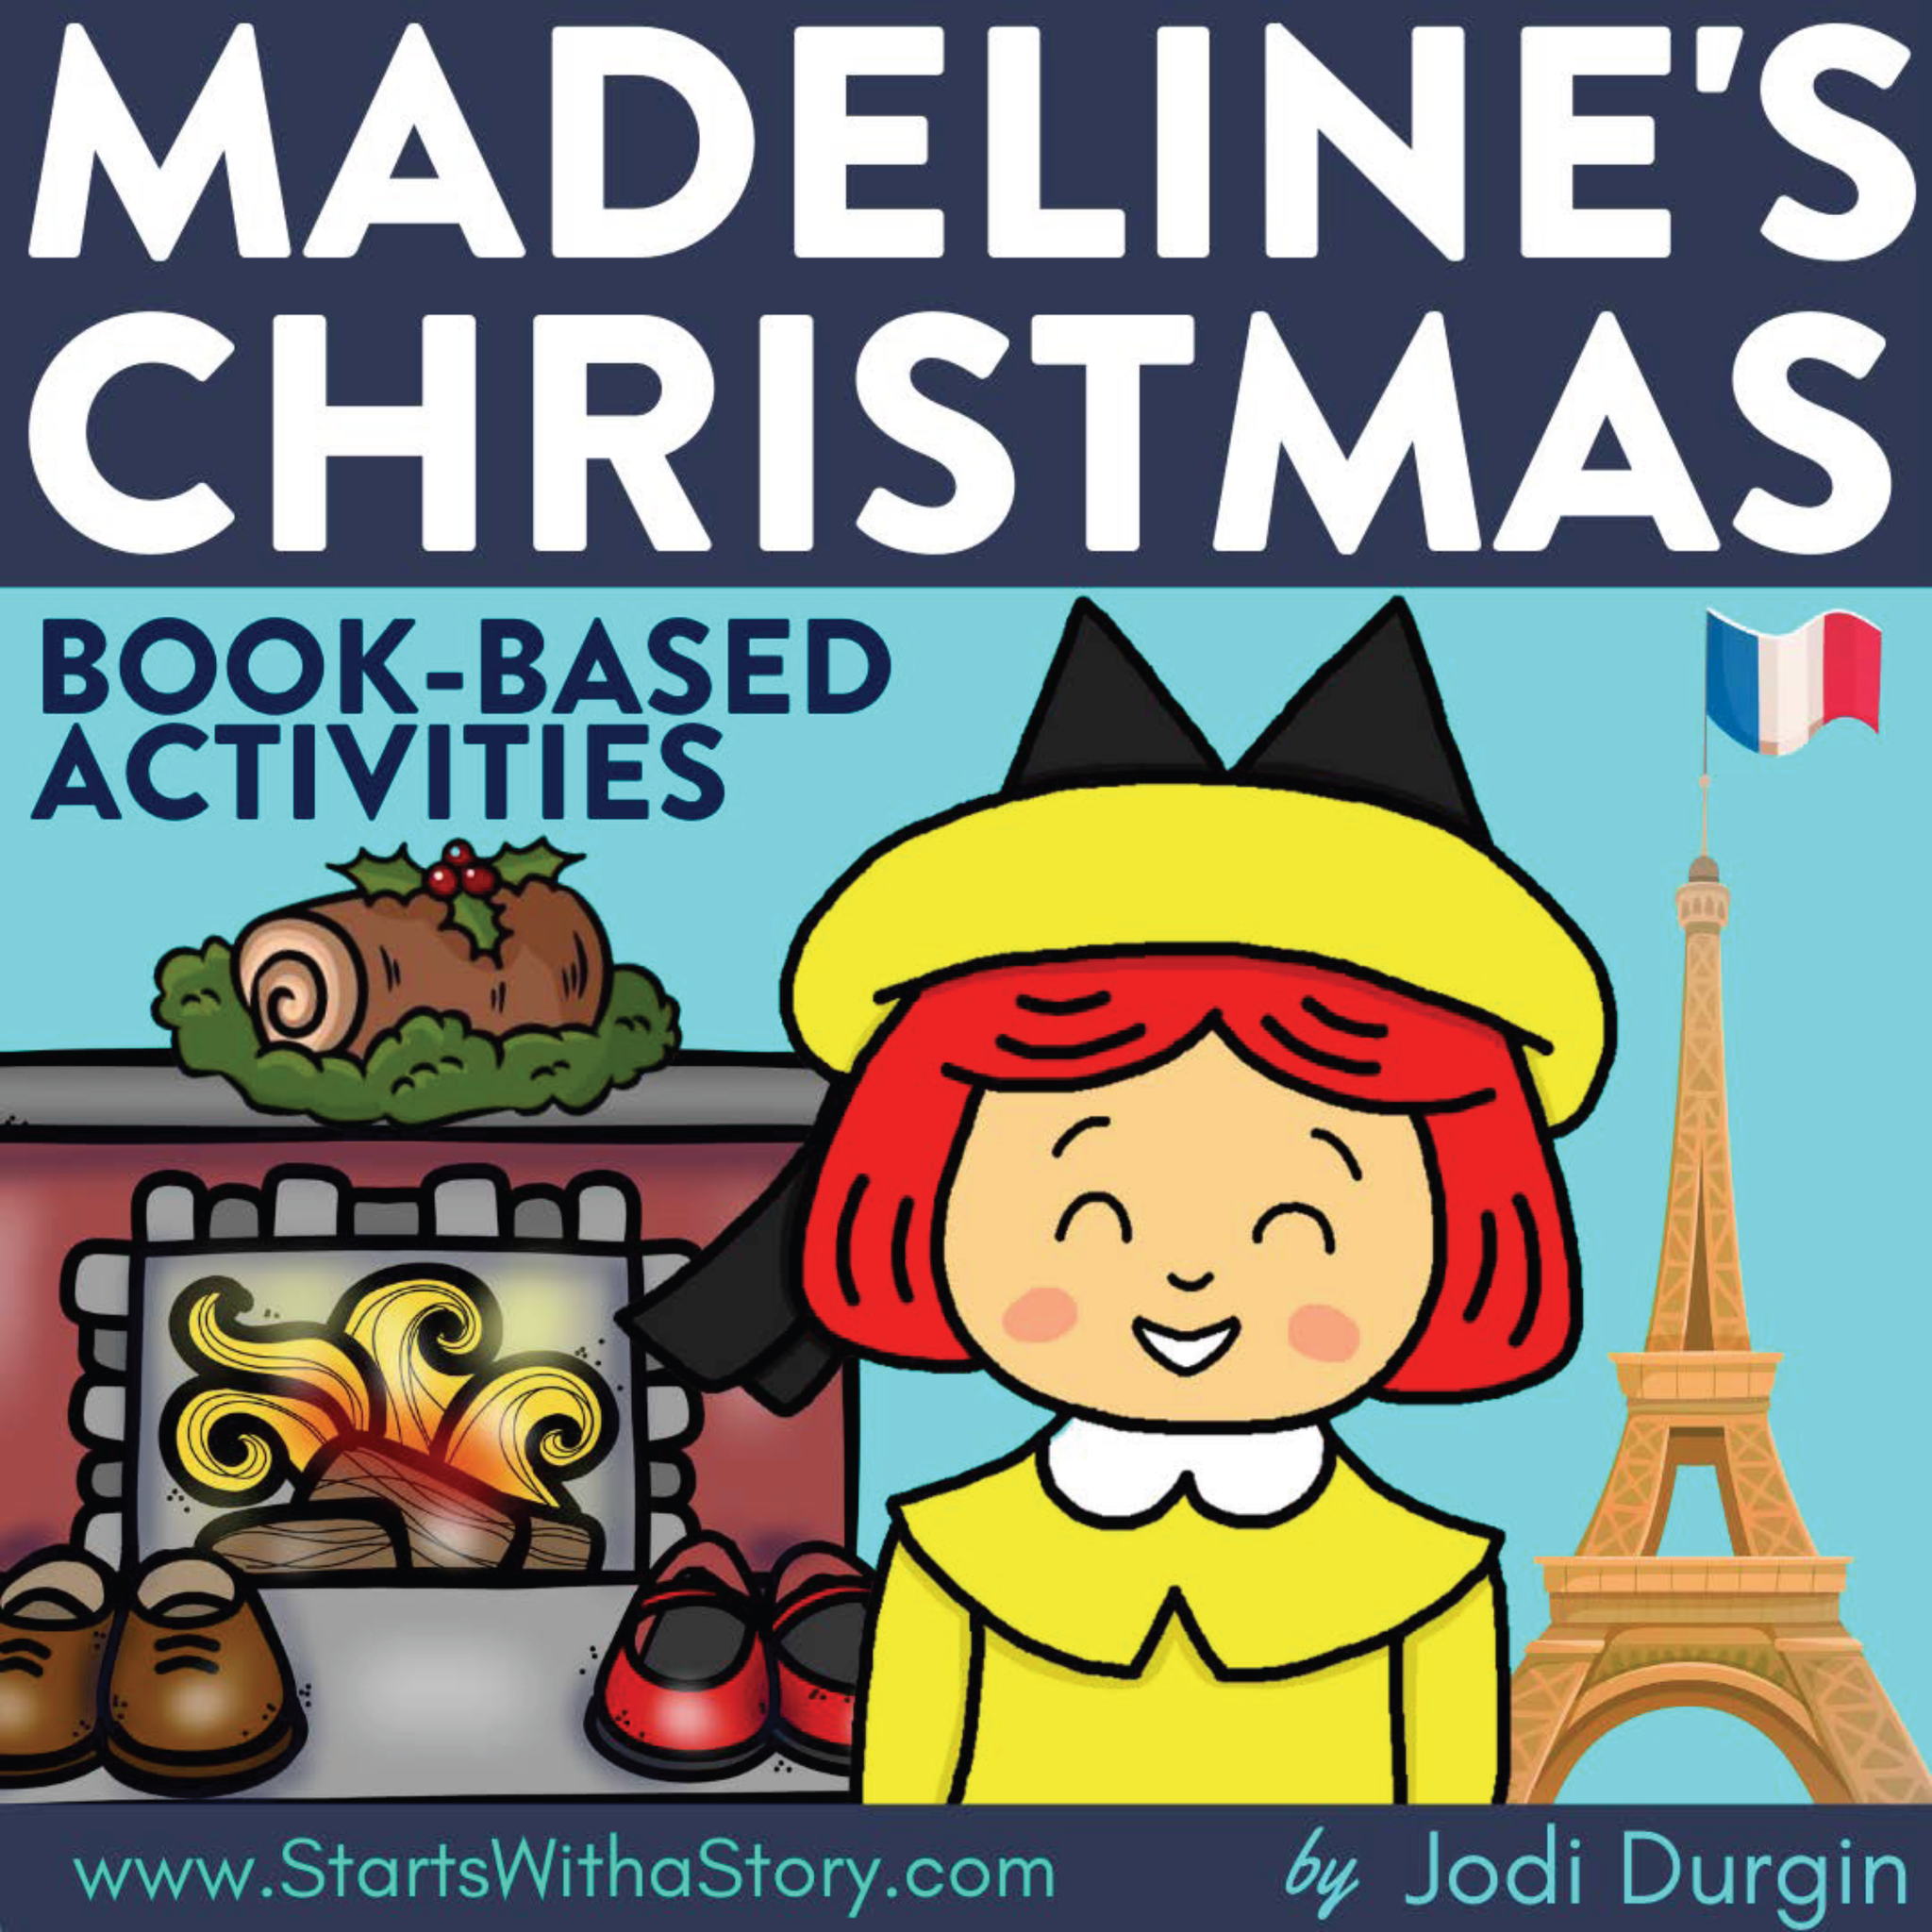 MADELINE'S CHRISTMAS activities and lesson plan ideas